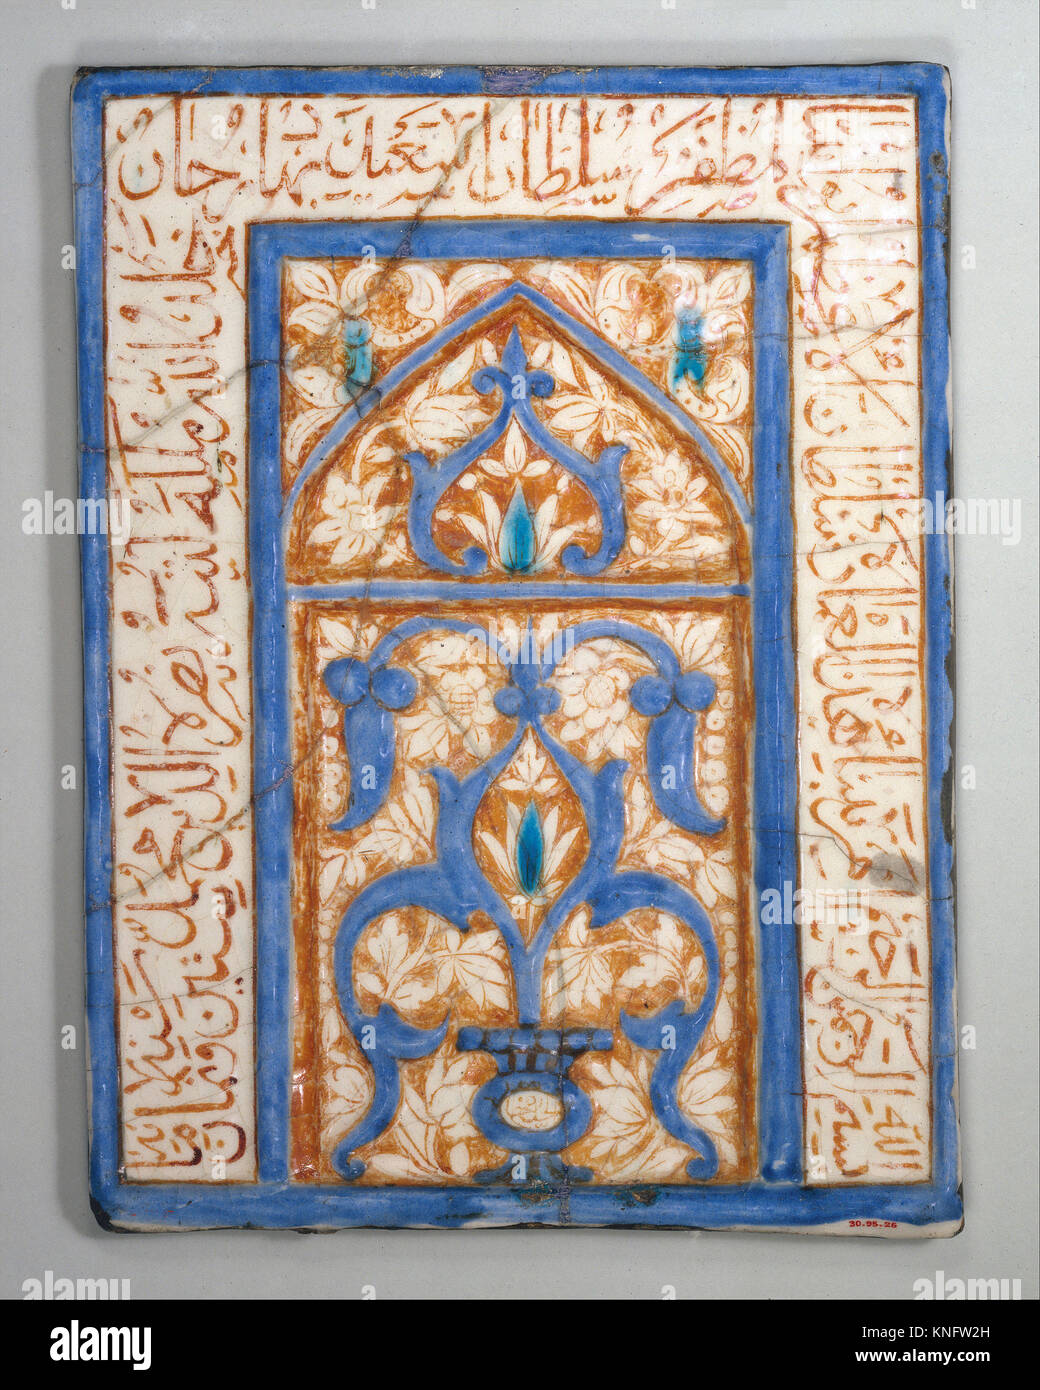 Tile with Niche Design. Calligrapher: Nusrat al-Din Muhammad; Object Name: Tile with niche design; Date: dated A.H. 860/A.D. 1455-56; Geography: Stock Photo